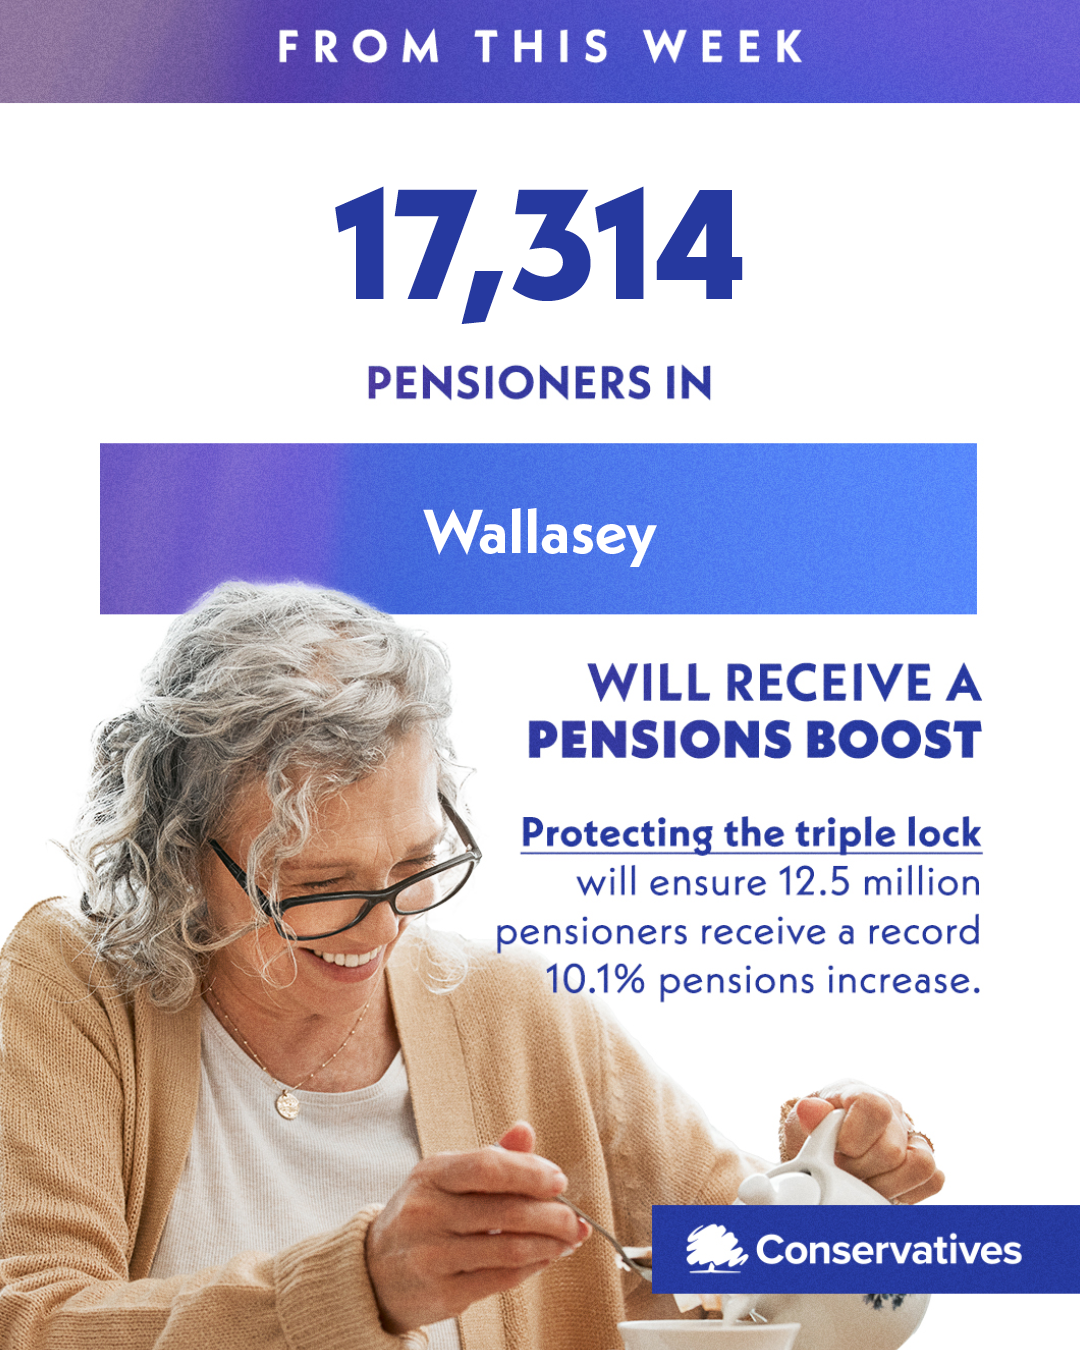 Wallasey pensioners